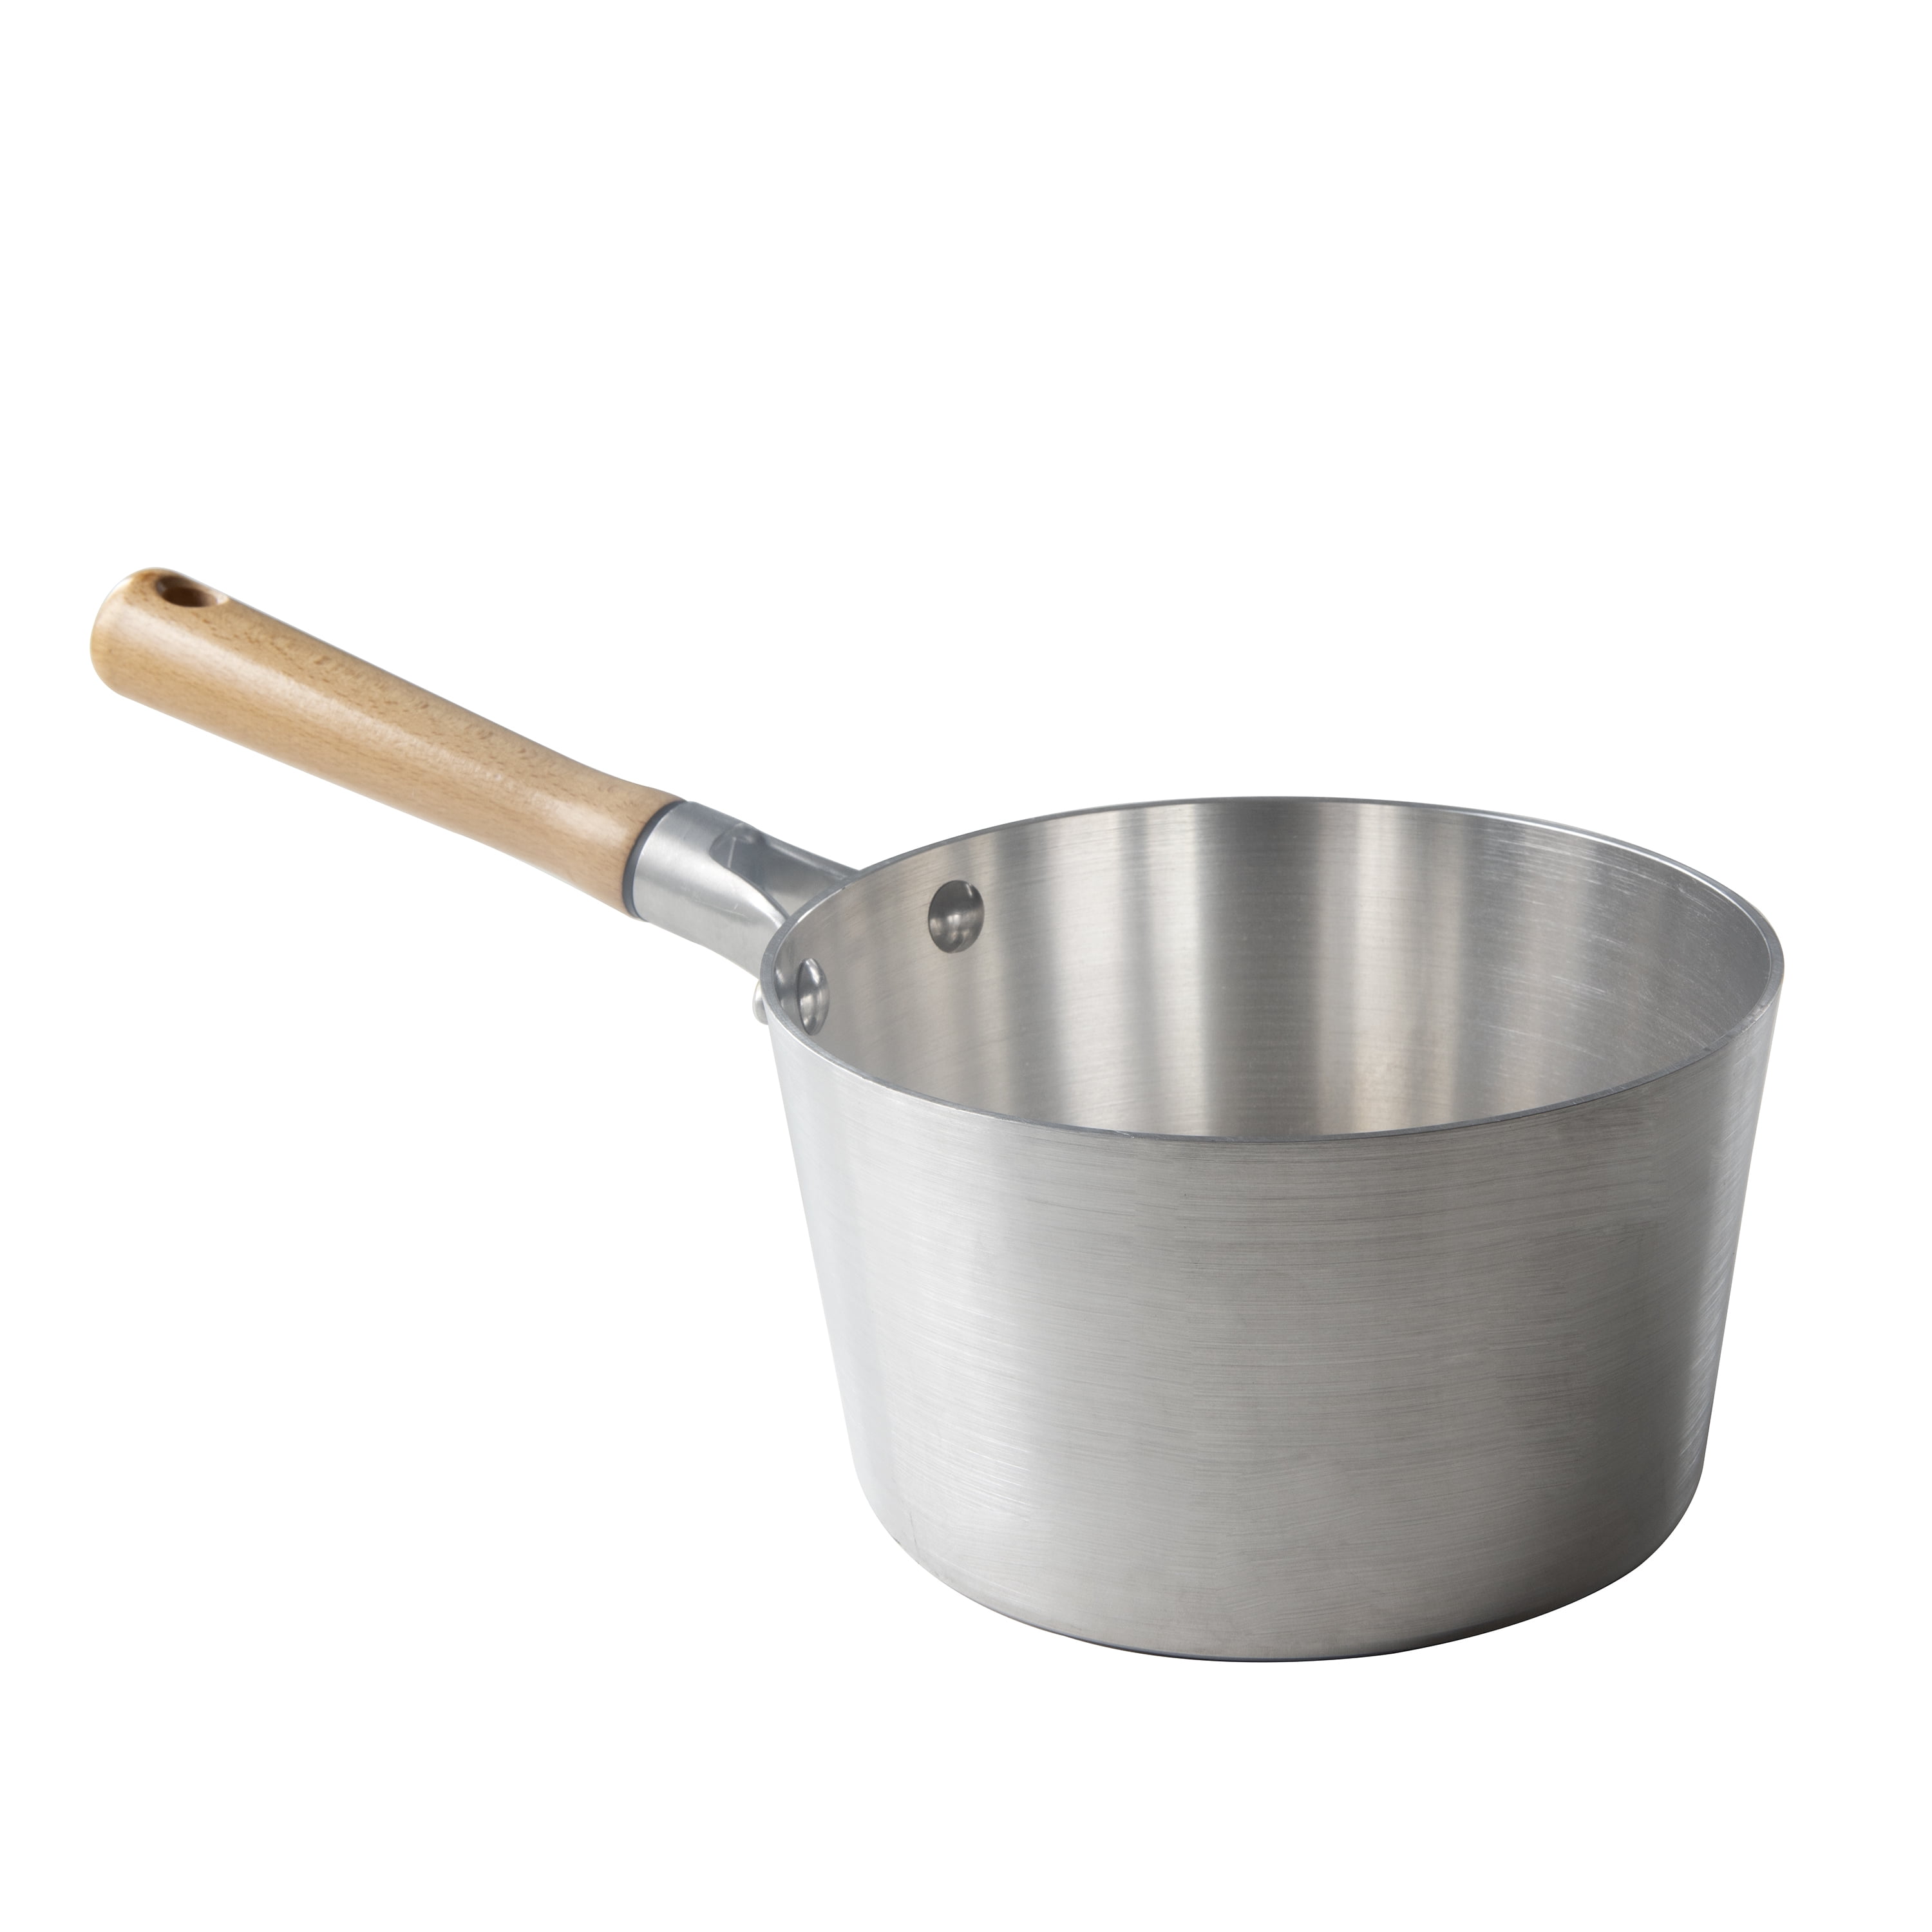 Nordic Ware - 14621 Nordic Ware Divided Sauce Pan, 3-in-1, Silver